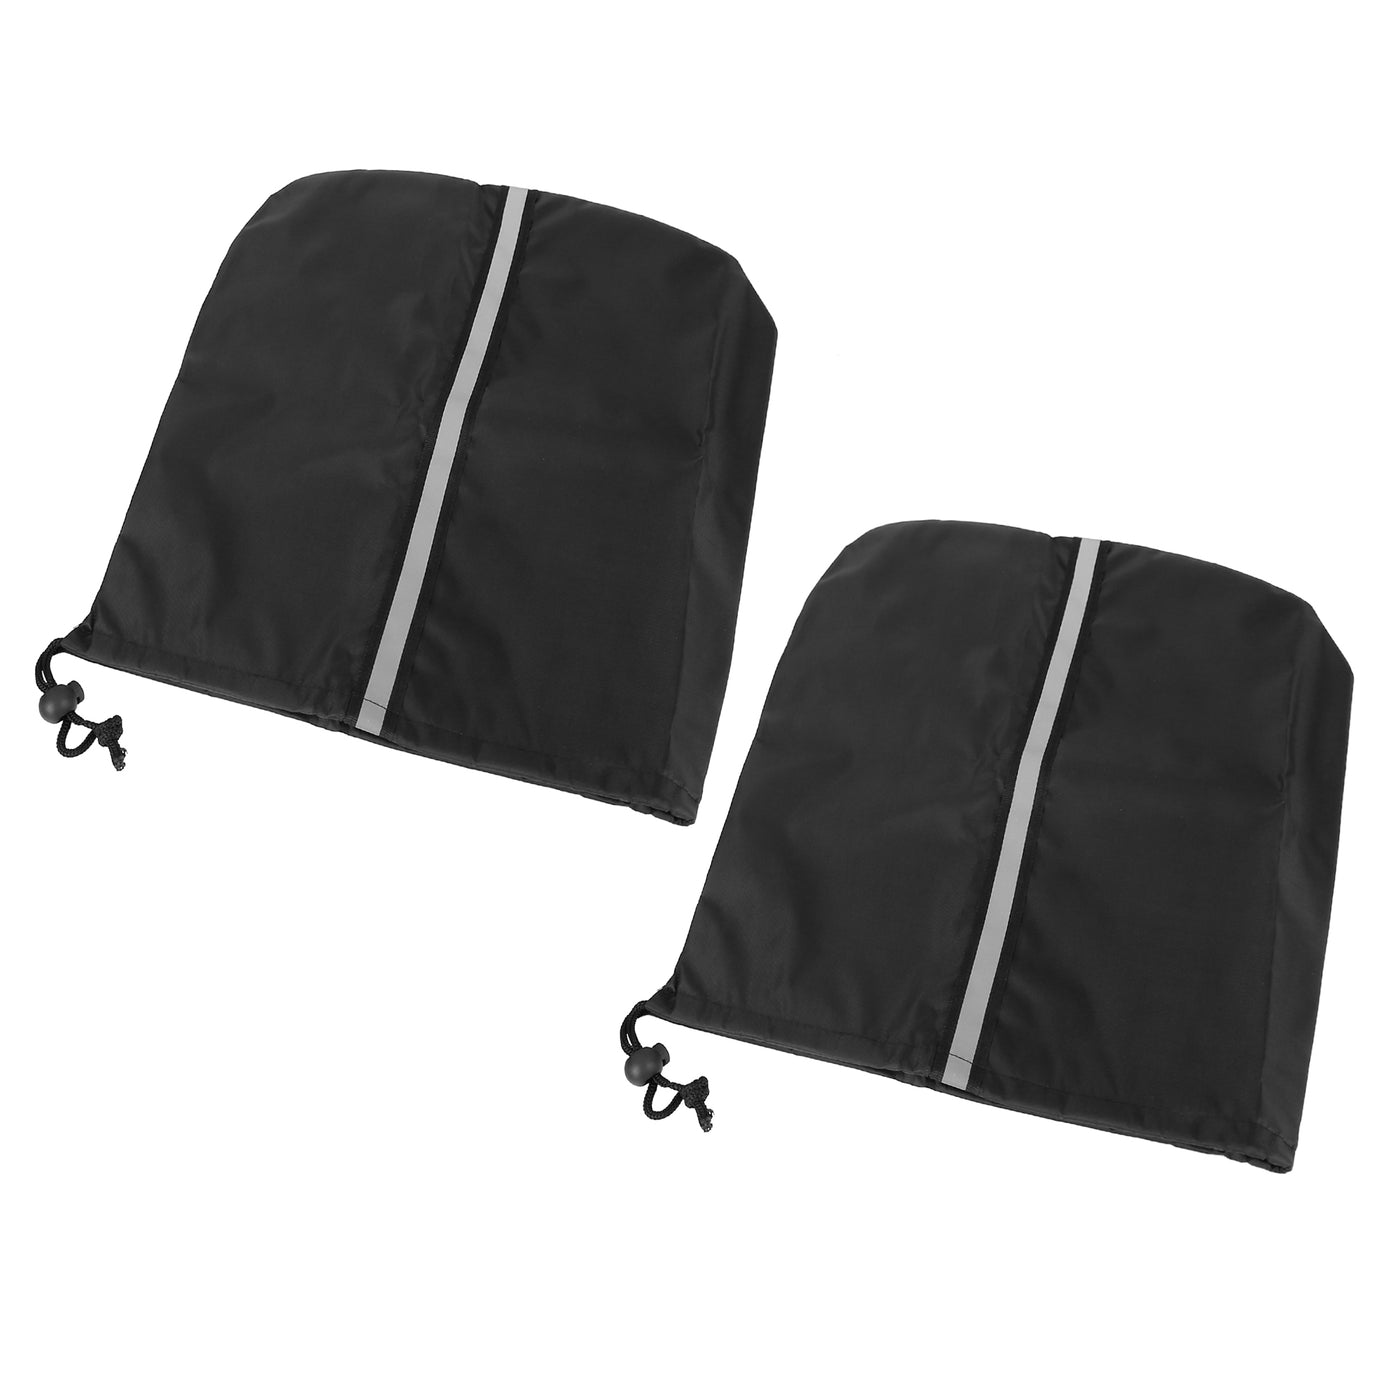 X AUTOHAUX Pair Black Rear Side View Mirror Cover Bag with Reflective Strip for Car Vehicle